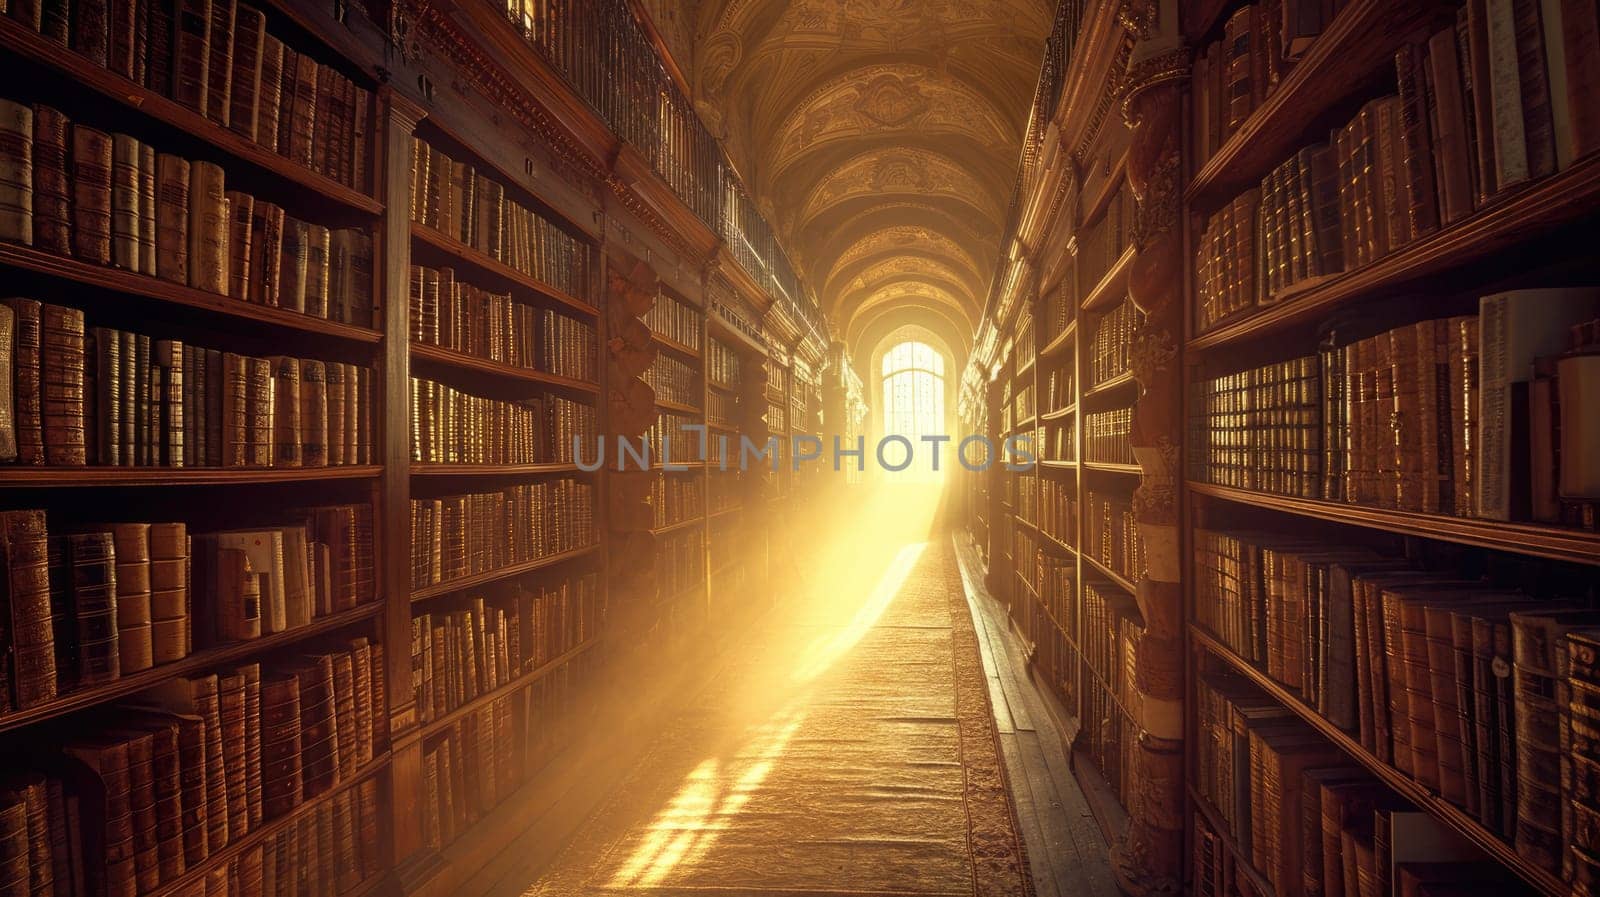 Mystical Sunlight in an Old Library Interior. Resplendent. by biancoblue